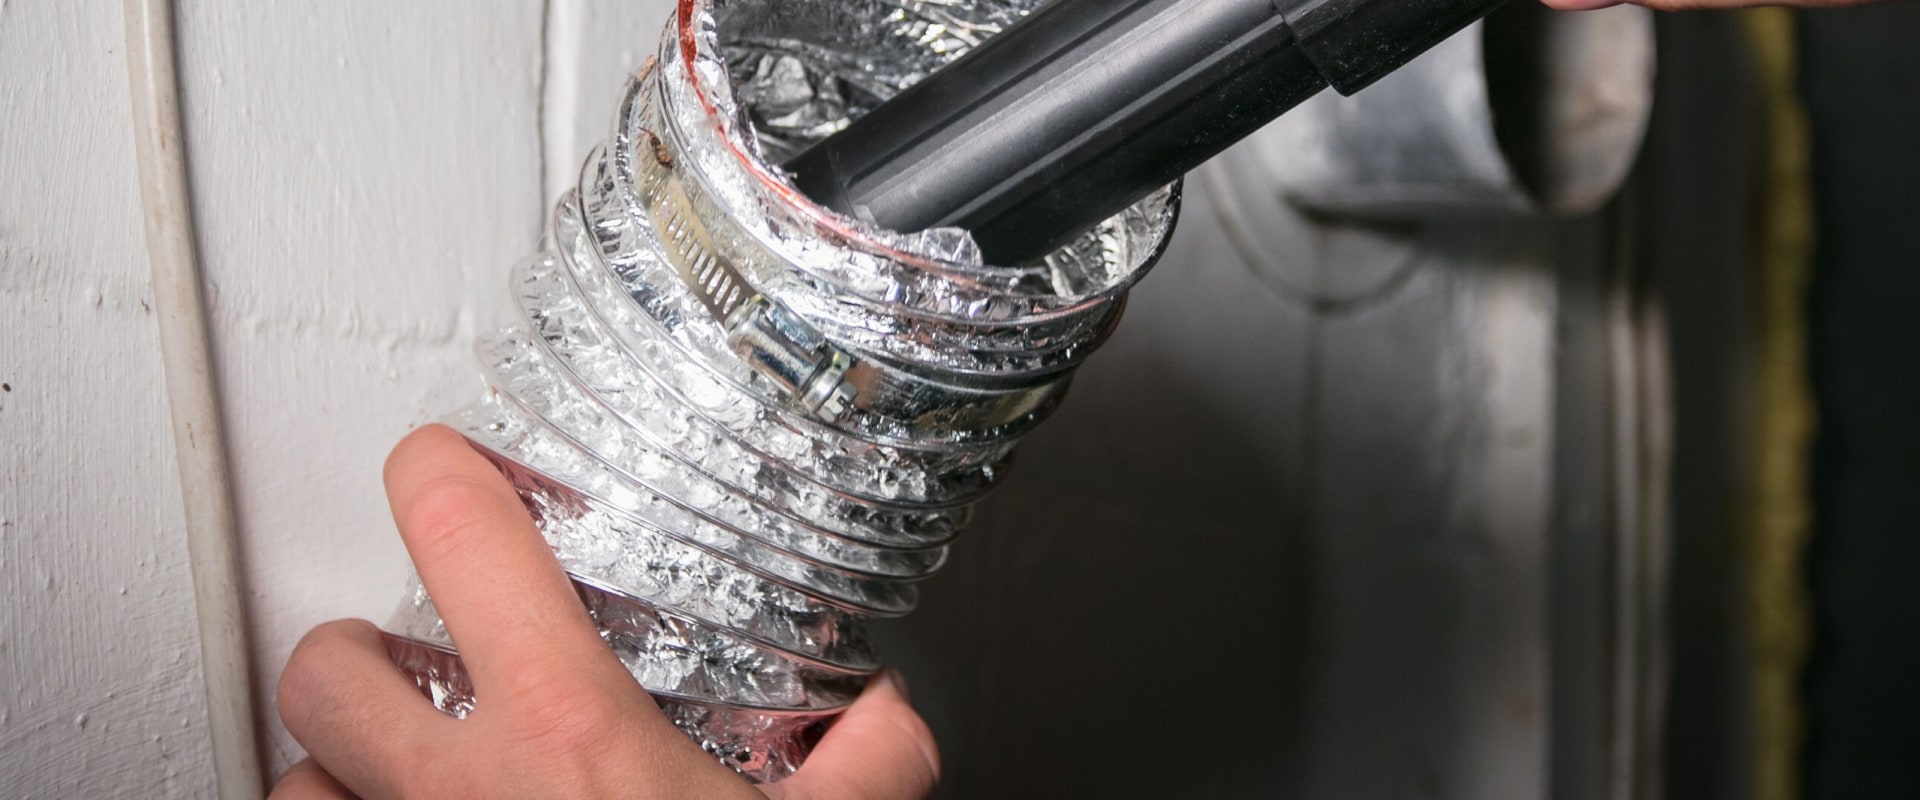 Cleaning Dryer Vents: An Overview